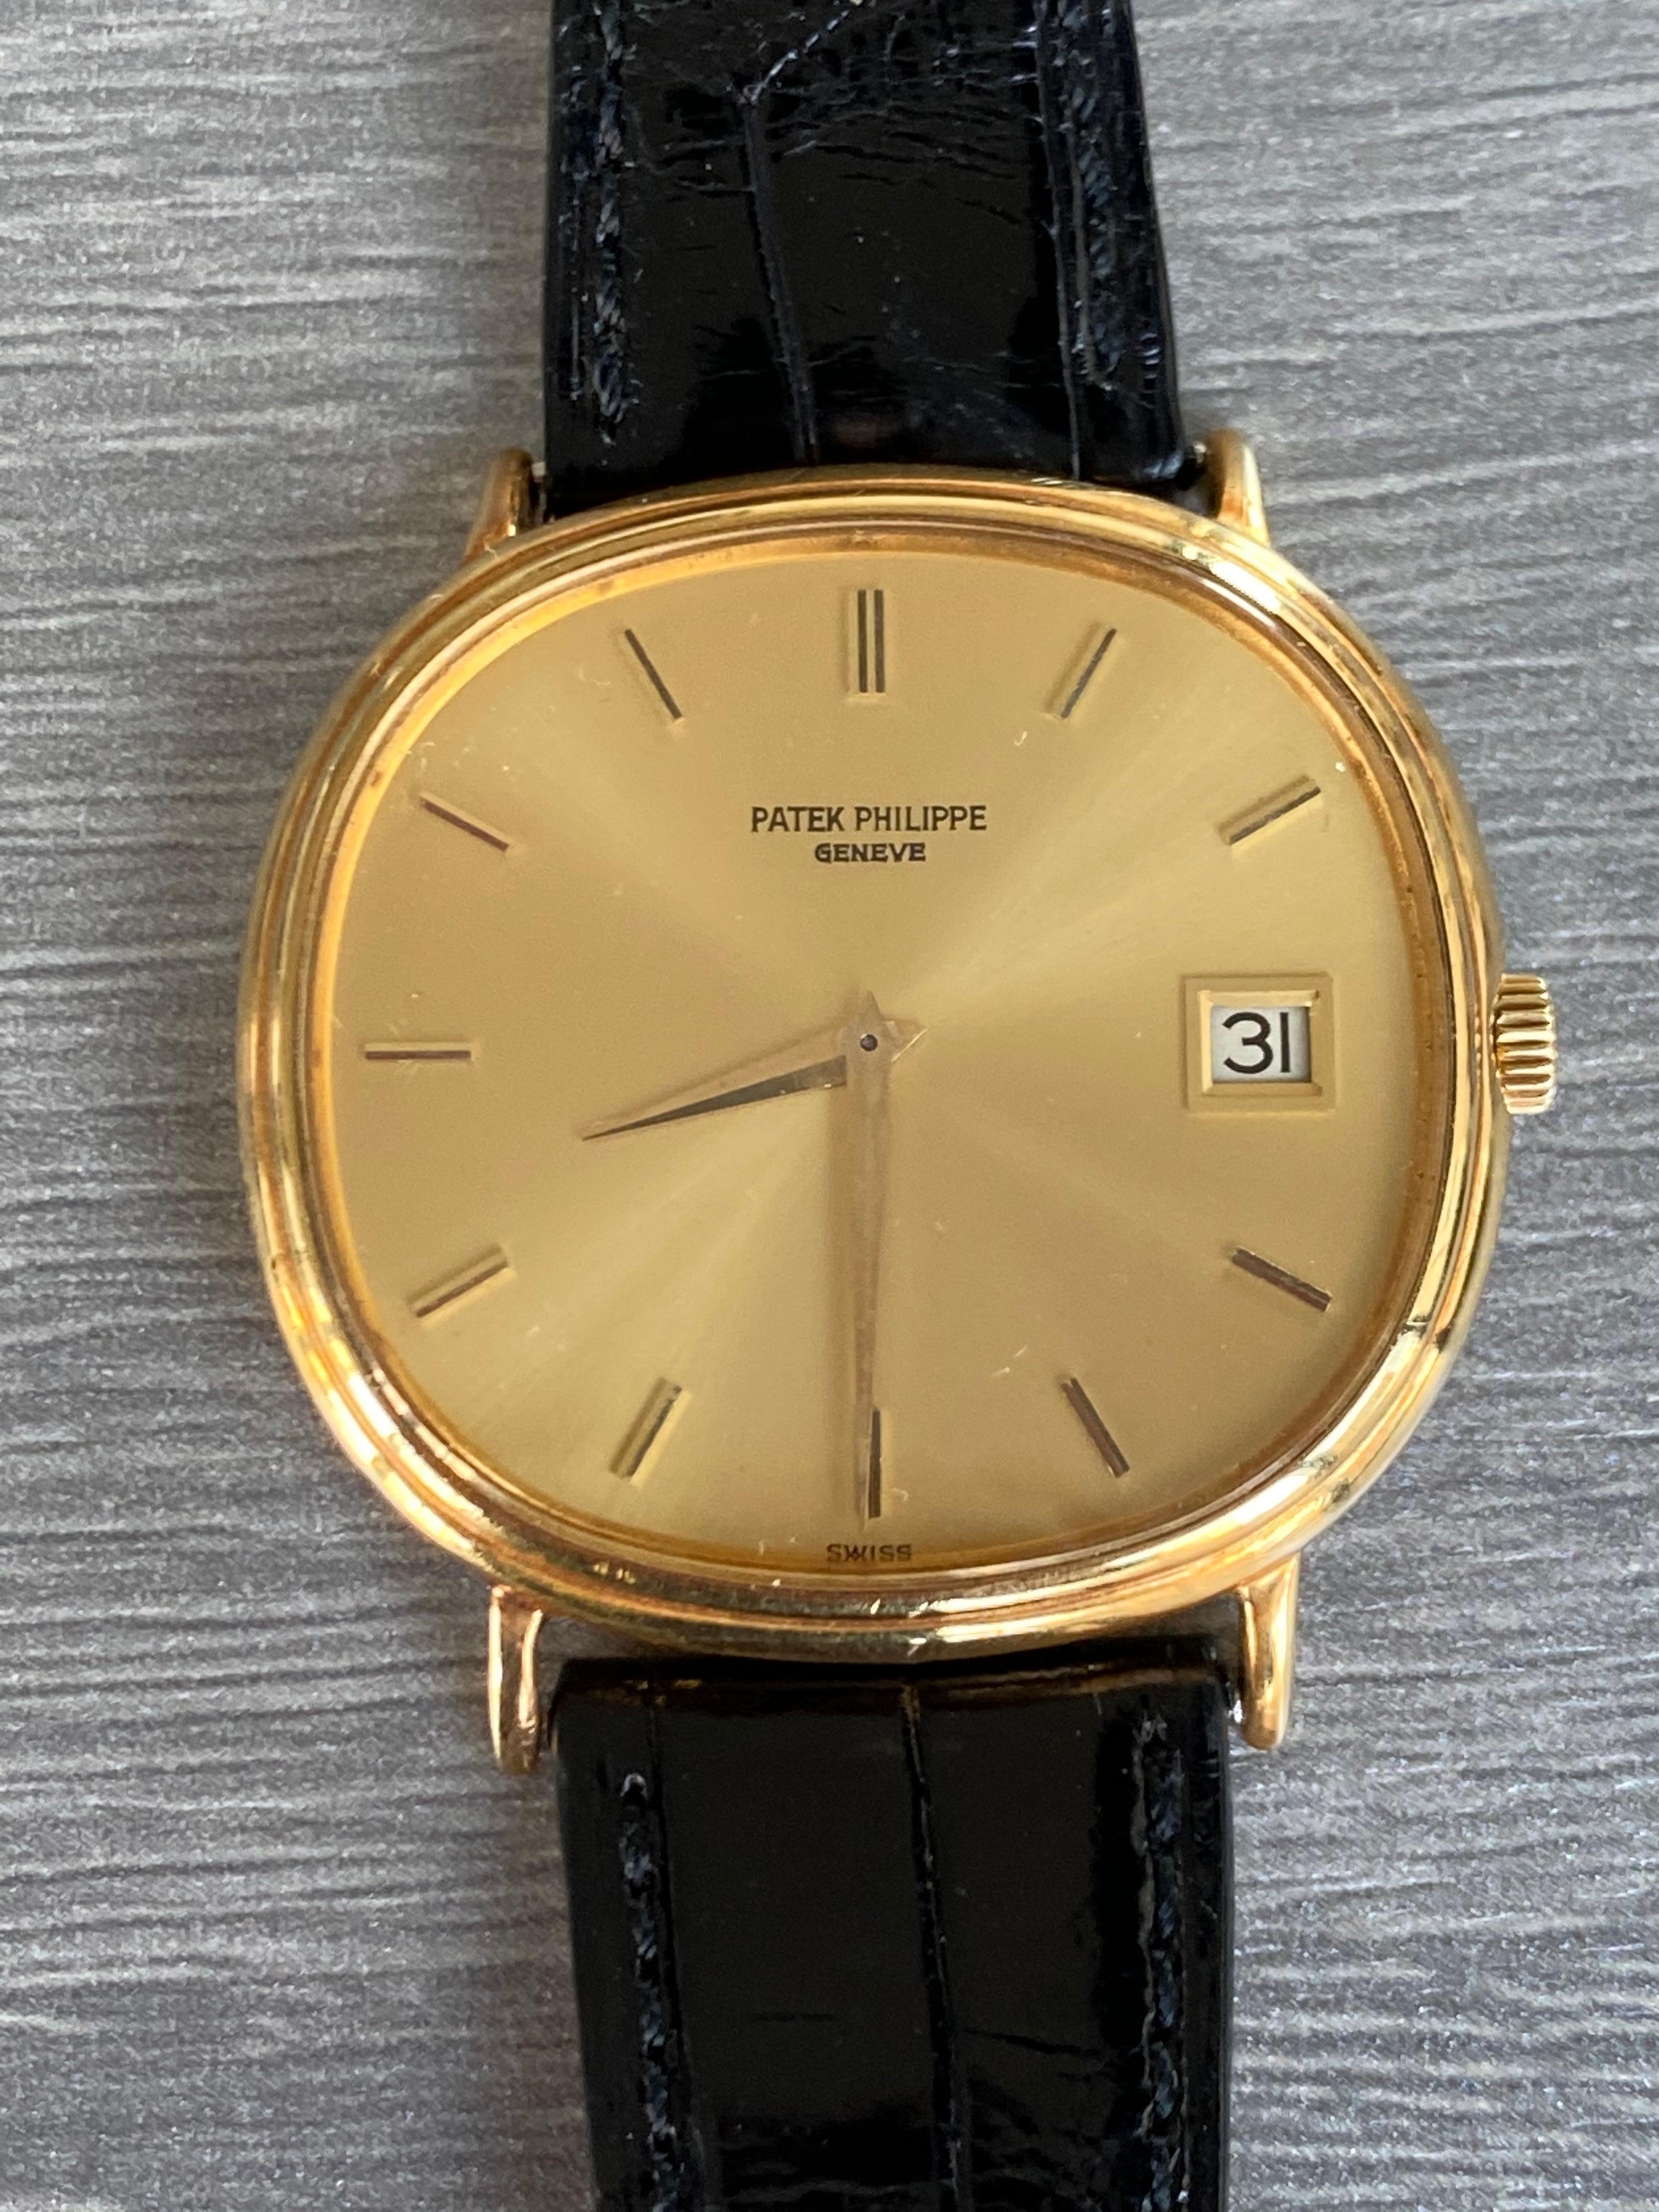 Preowned, excellent condition Patek Philippe Automatic Ellipse reference 3839 18k Yellow Gold gents wristwatch.Circa 1980’s. Gold dial, baton hour markers, date display at 3 o’clock, an 18k Yellow Gold 36mm case, bezel, winder and classic pin buckle